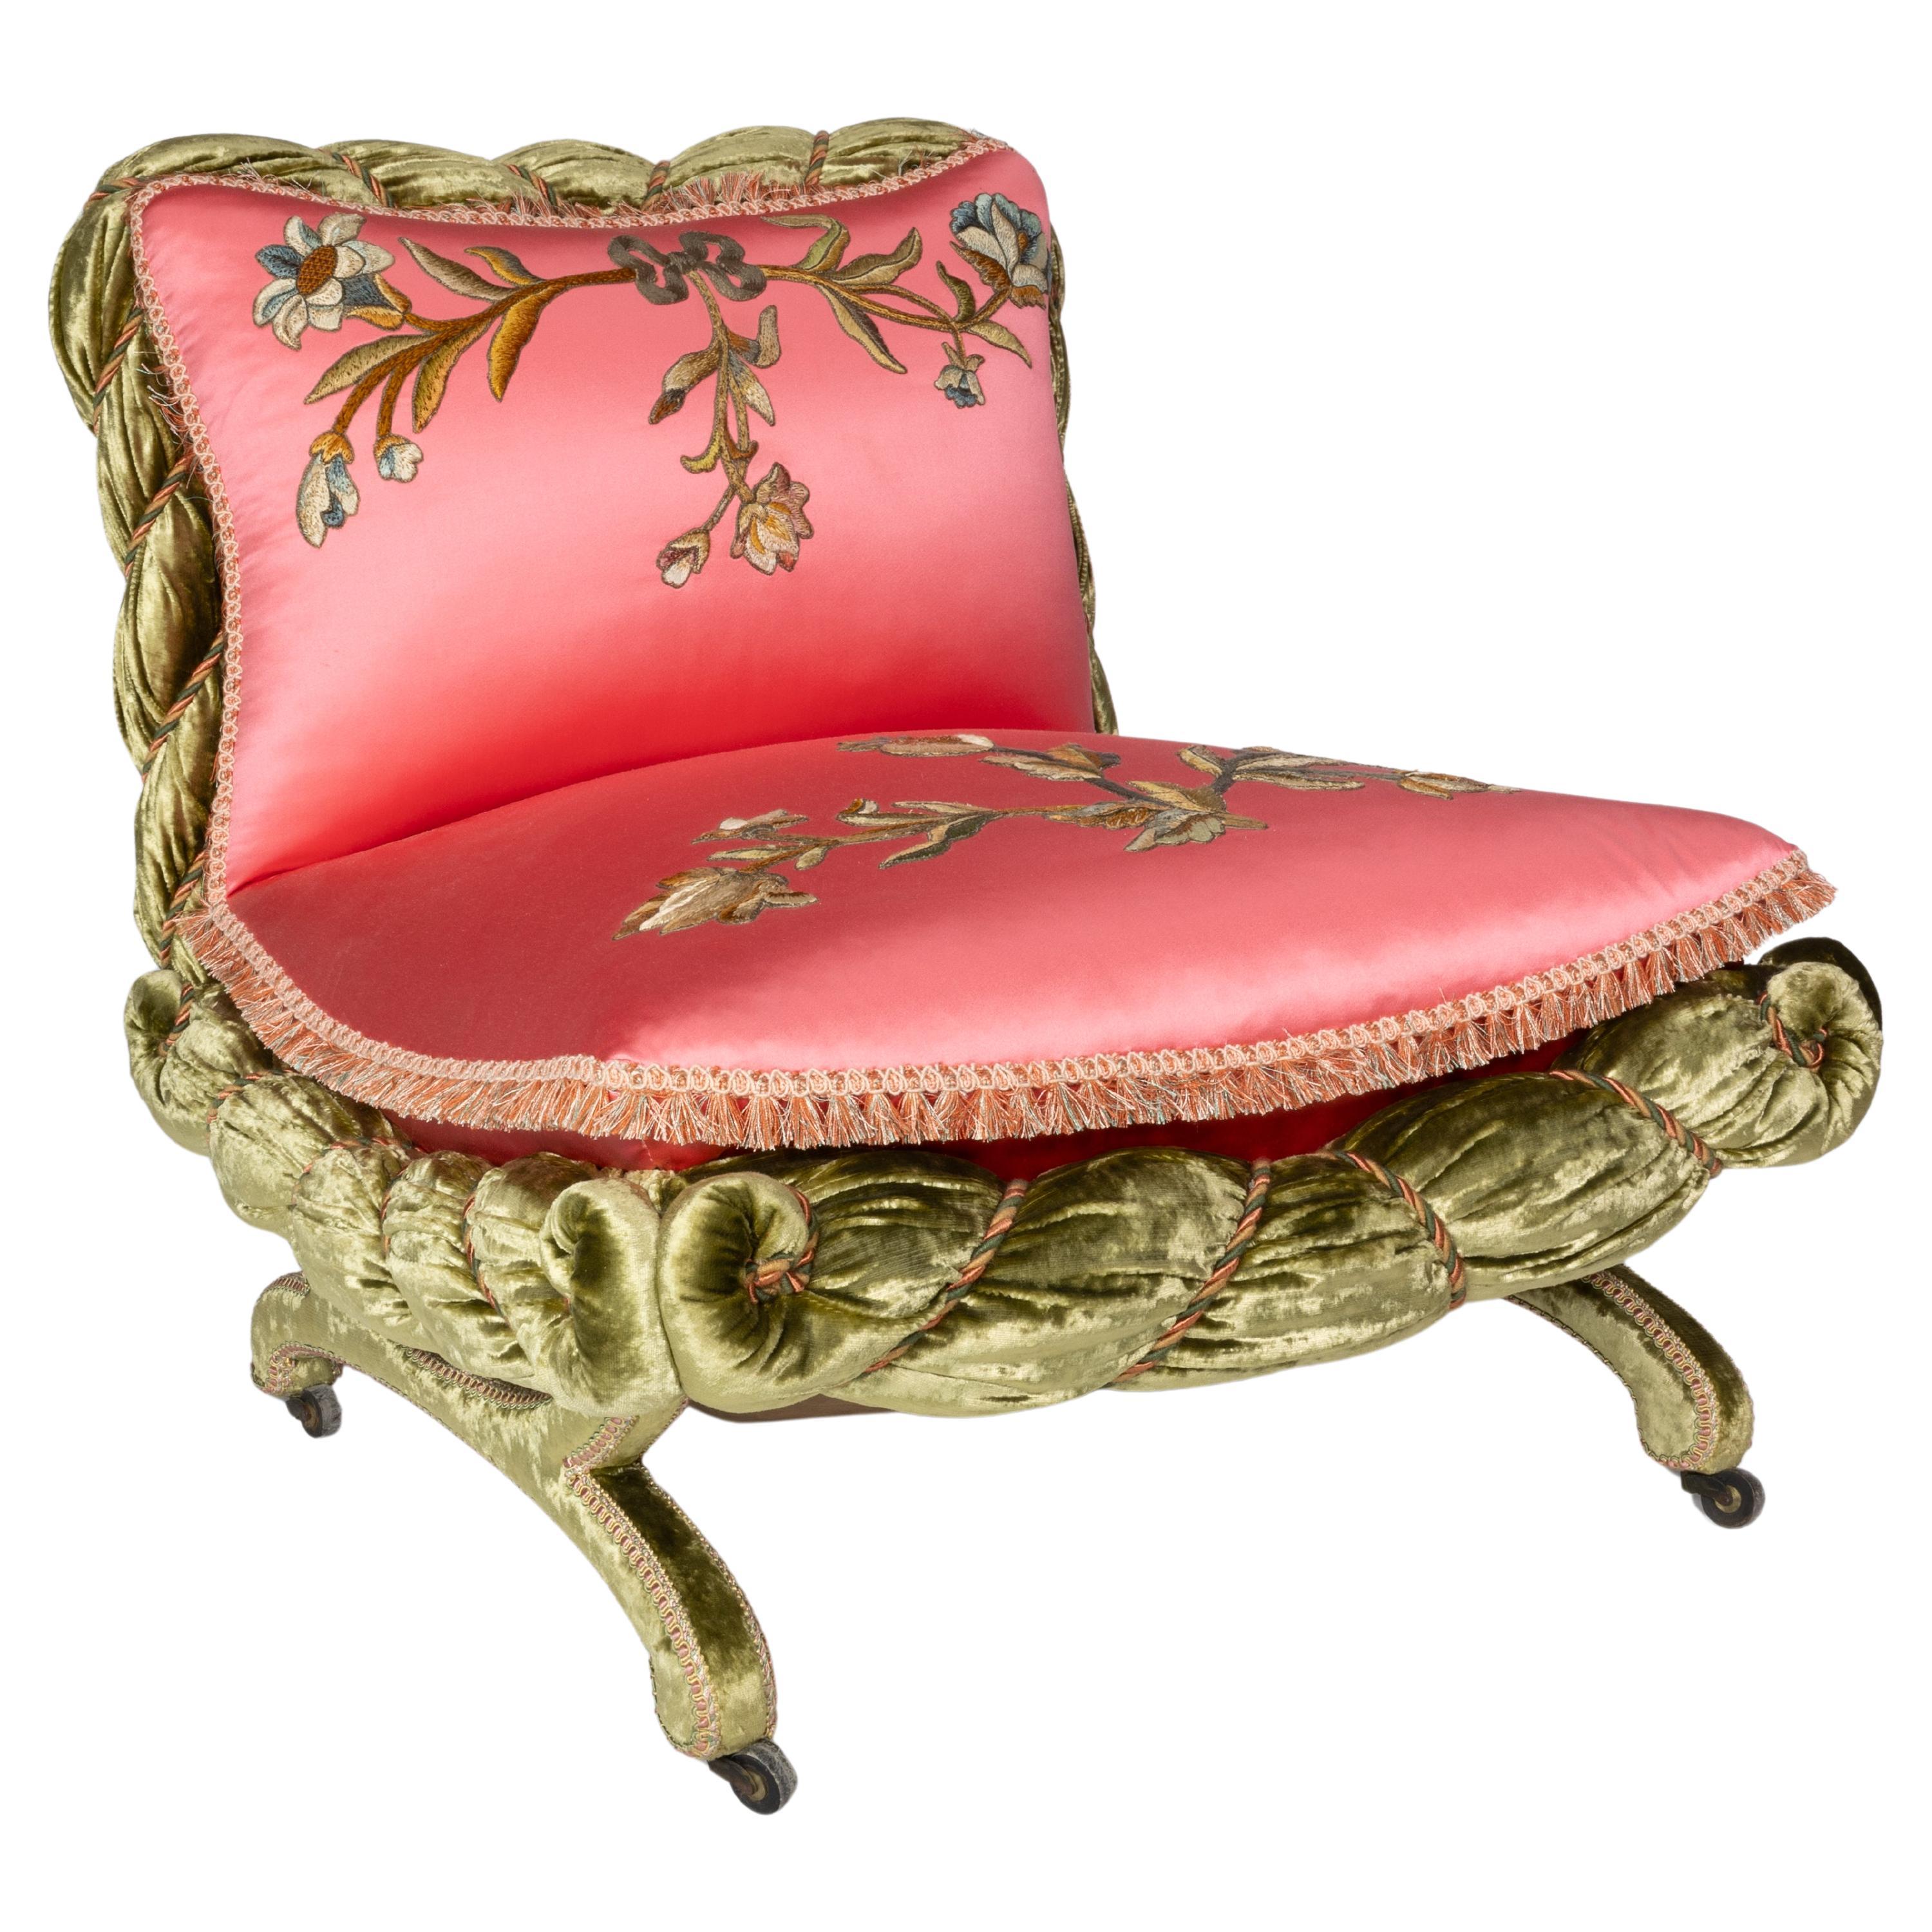 Le Bon Marché Boudoir chair upholstery restored b The Royal School of Needlework For Sale